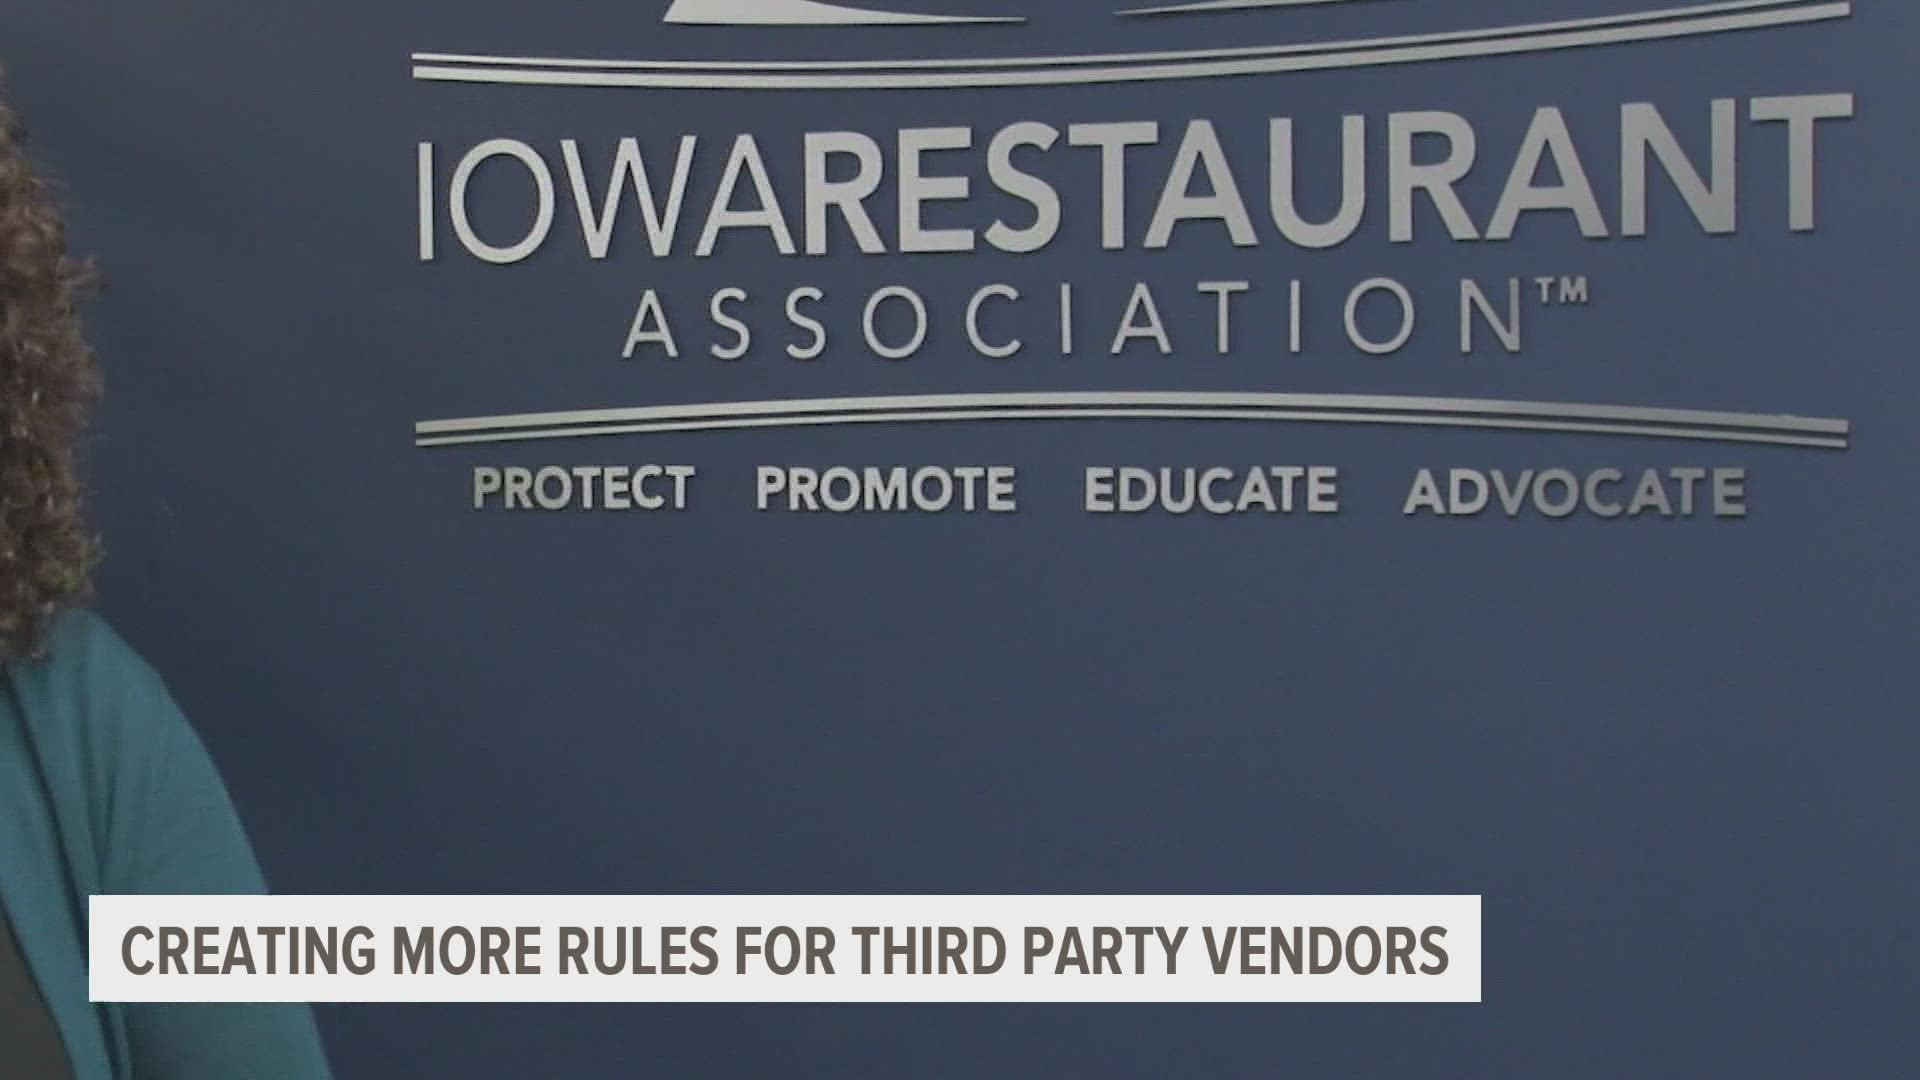 Iowa Restaurant Association wants legislation passed to create a contract between third-party vendors and restaurants. So both share liability if a problem arises.